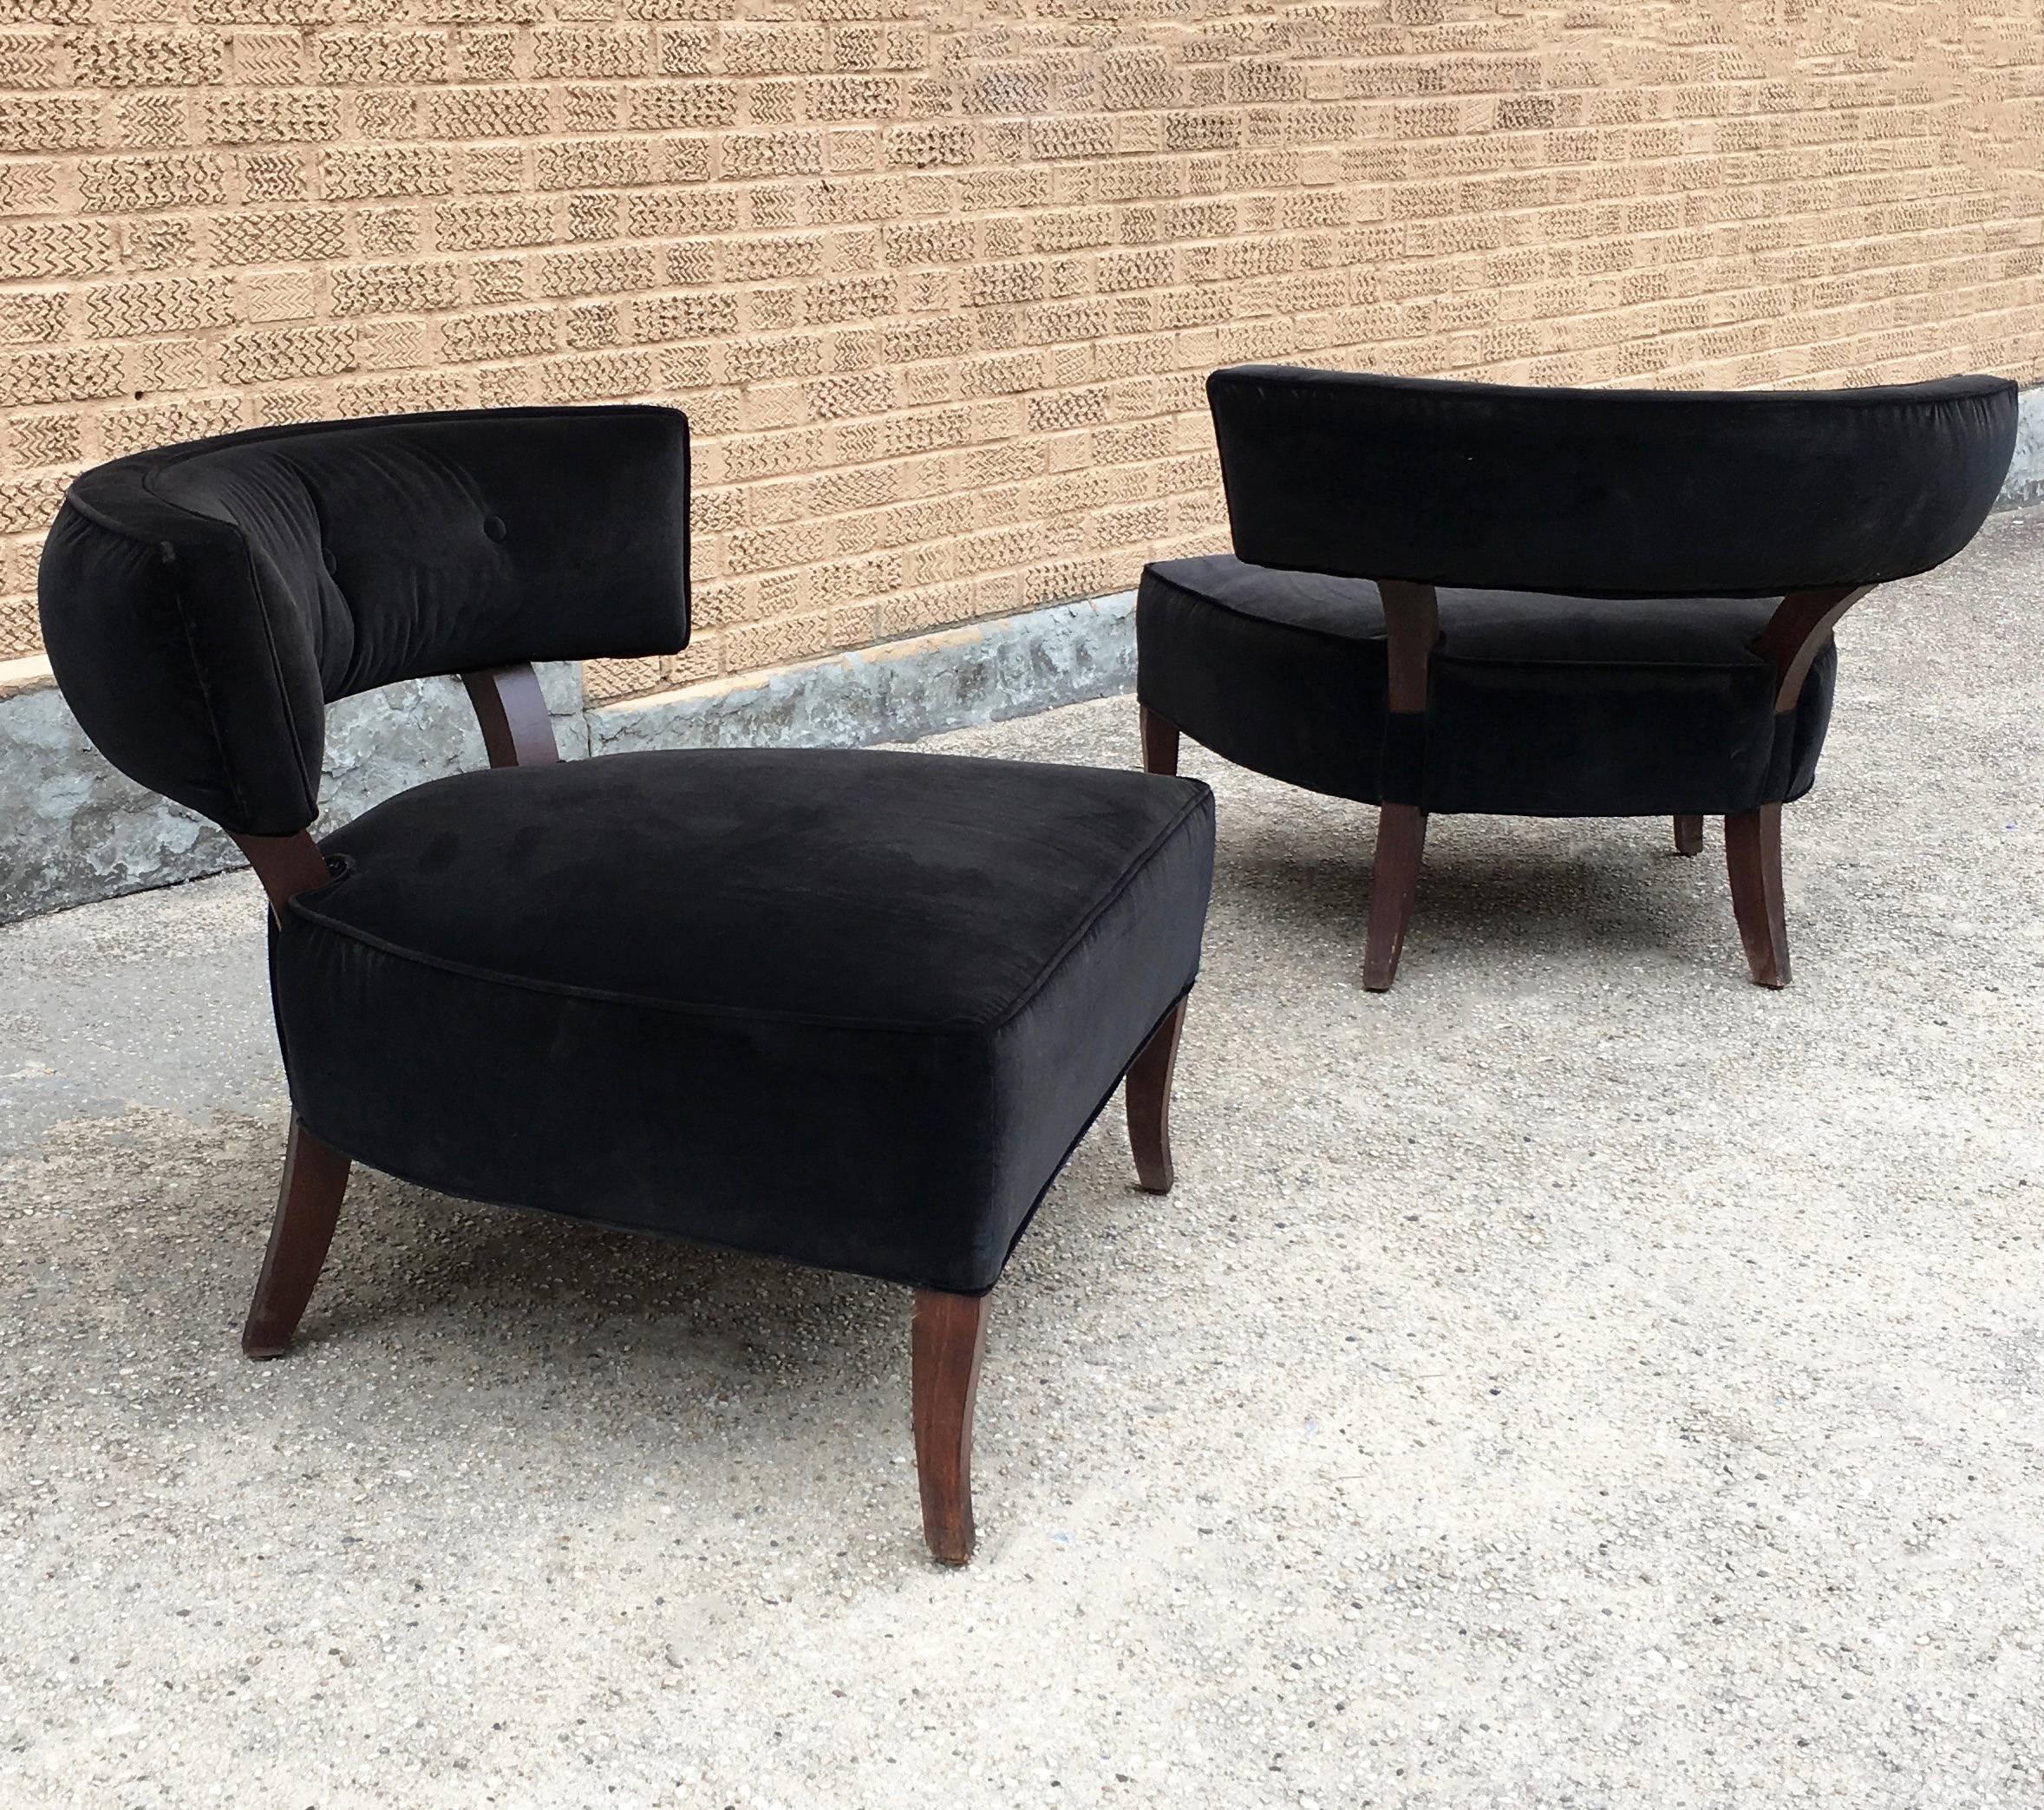 Pair of Hollywood Regency, slipper, hostess chairs upholstered in black velvet with maple frames feature curvaceous lines in the style of Billy Haines. Seat depth is 24